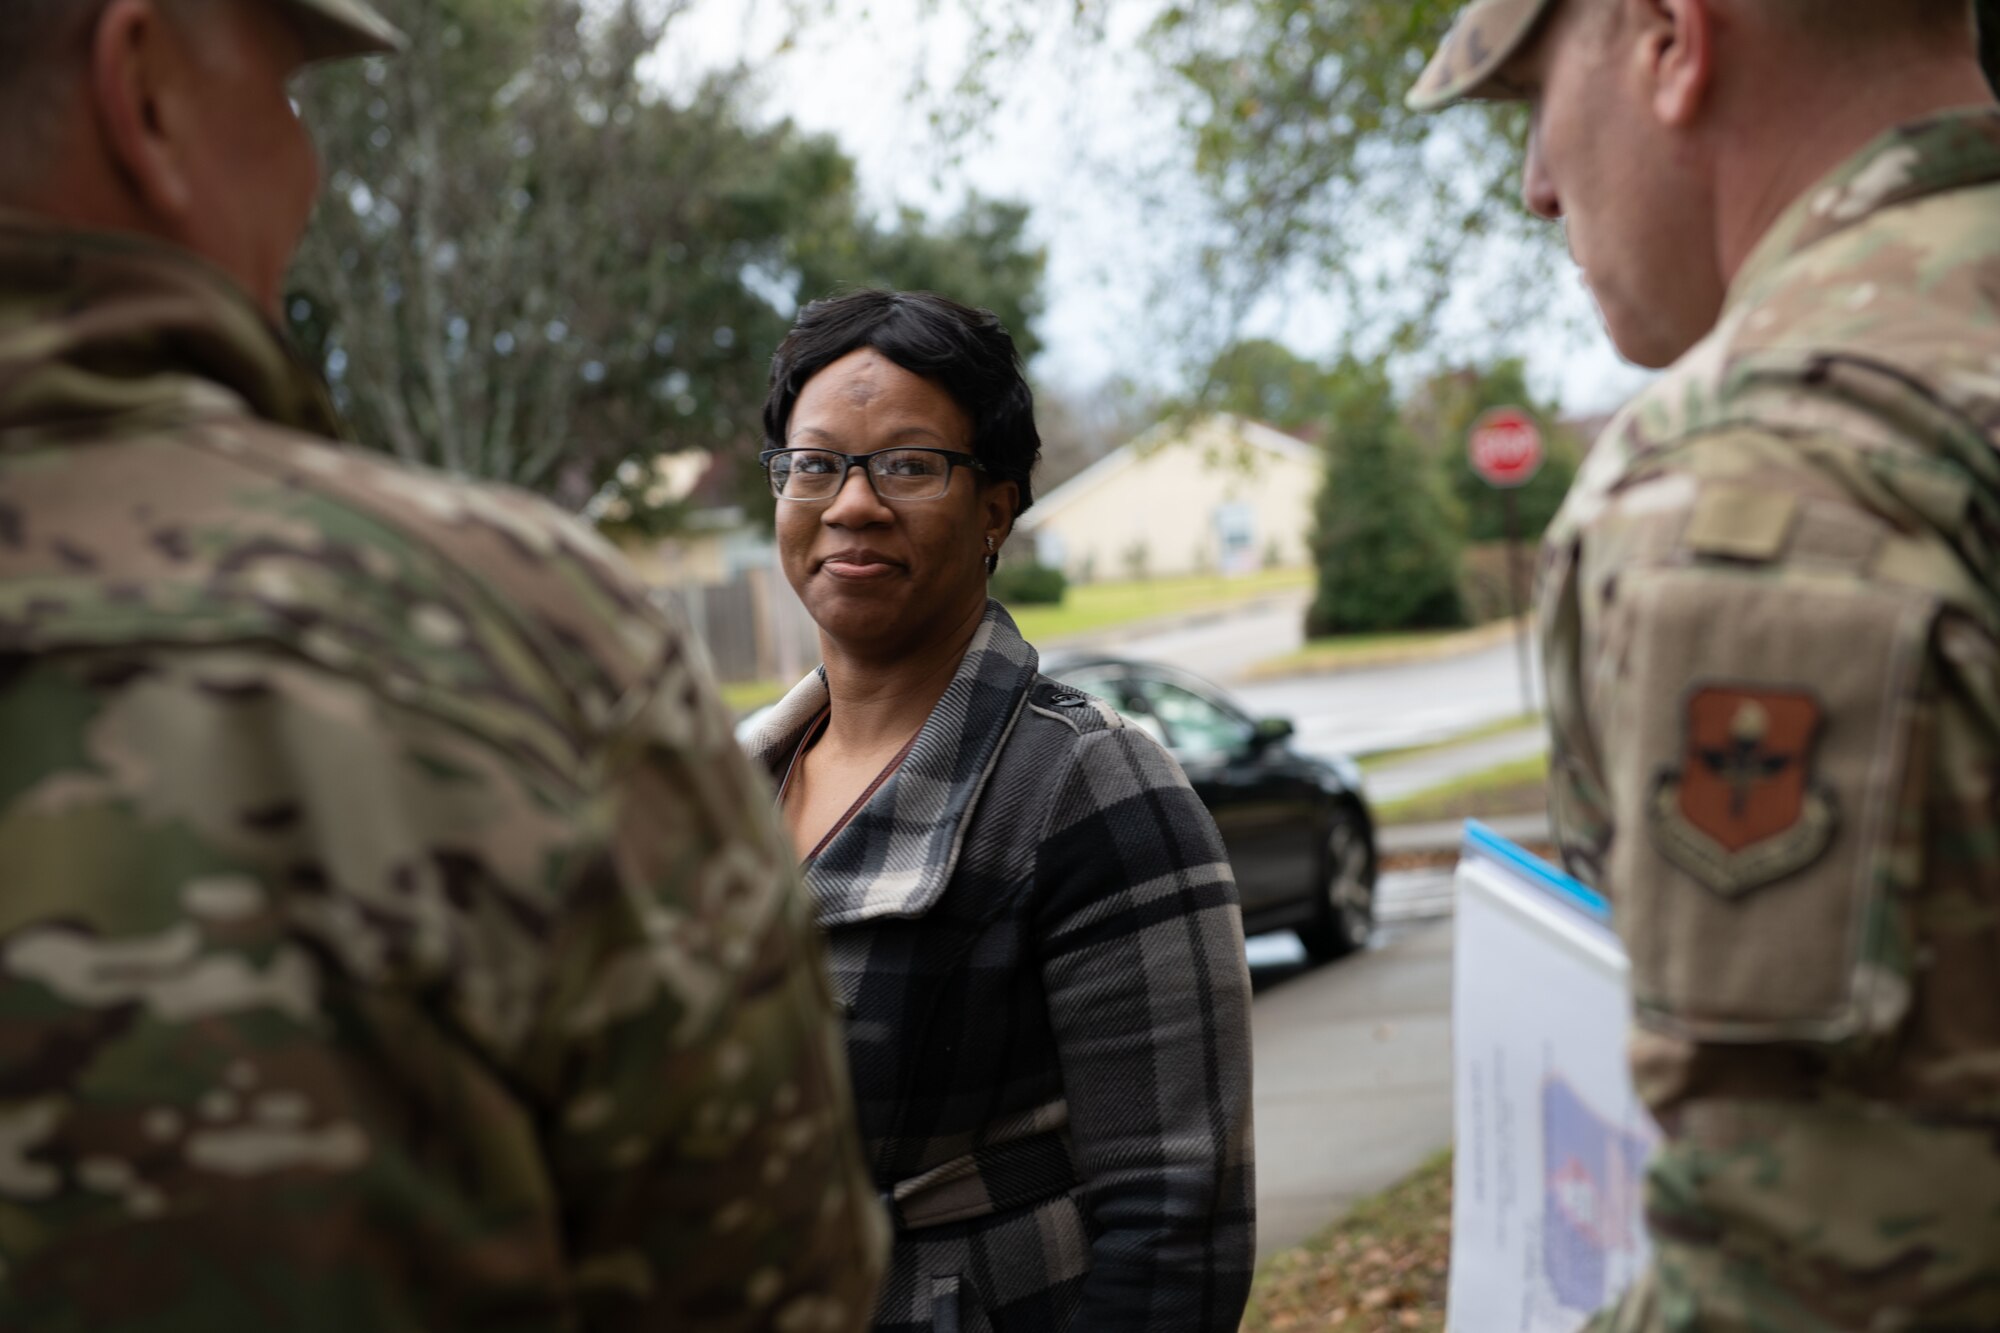 Kaneshia Pickens, dorm manager, speaks with the command teams from Air Education and Training Command, Air University and the 42nd Air Base Wing during their arrival to tour the dorms, Jan. 29, 2020 at Maxwell Air Force Base, Alabama. During their visit, the command teams toured the rooms of two Airmen and other dorm amenities. (U.S. Air Force photo by Senior Airman Alexa Culbert)